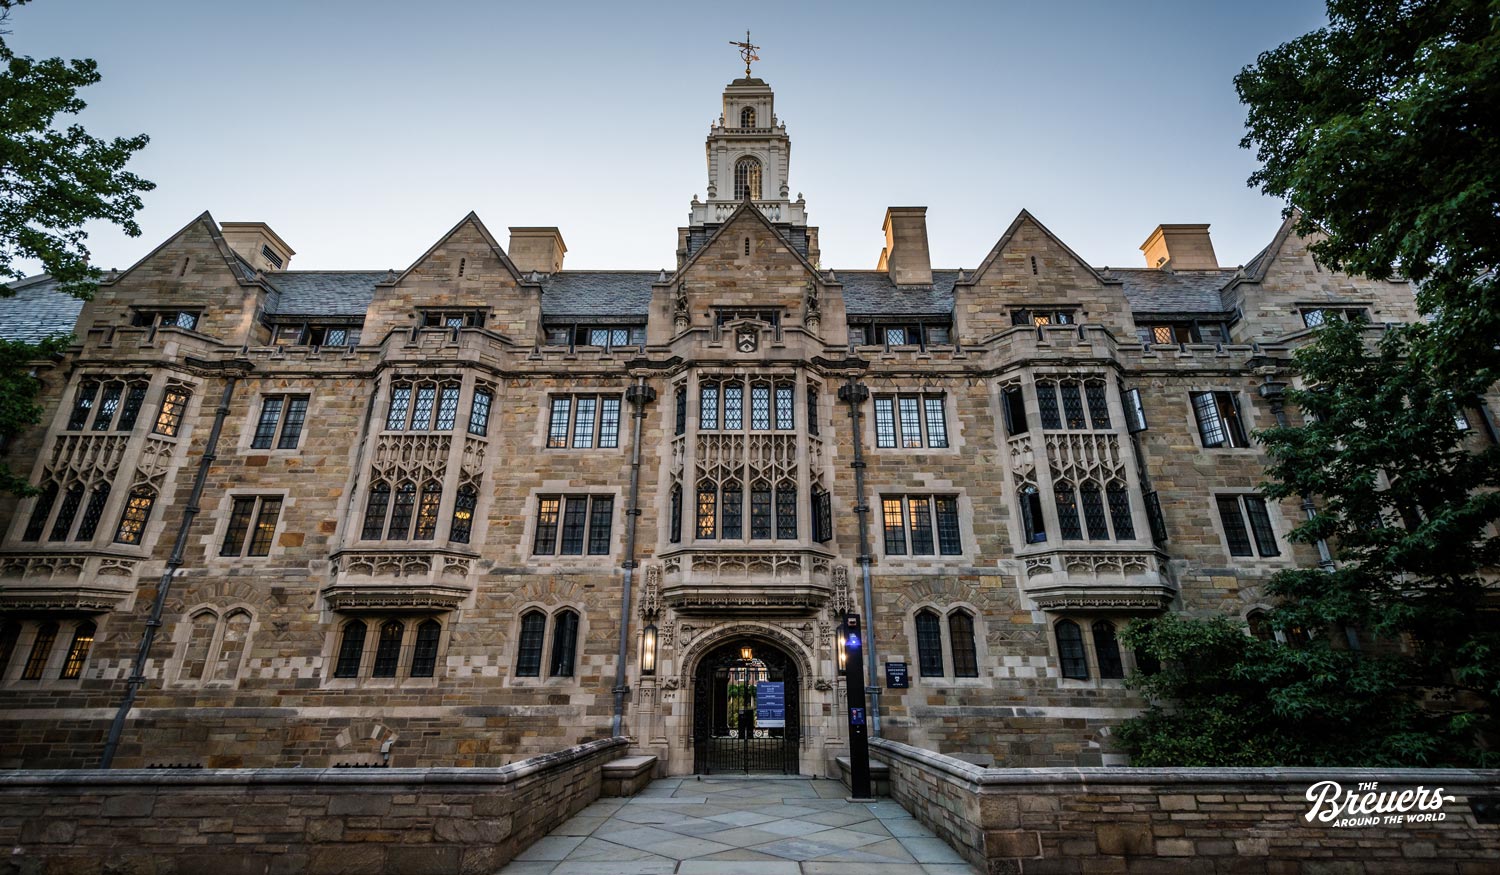 Yale University in New Haven